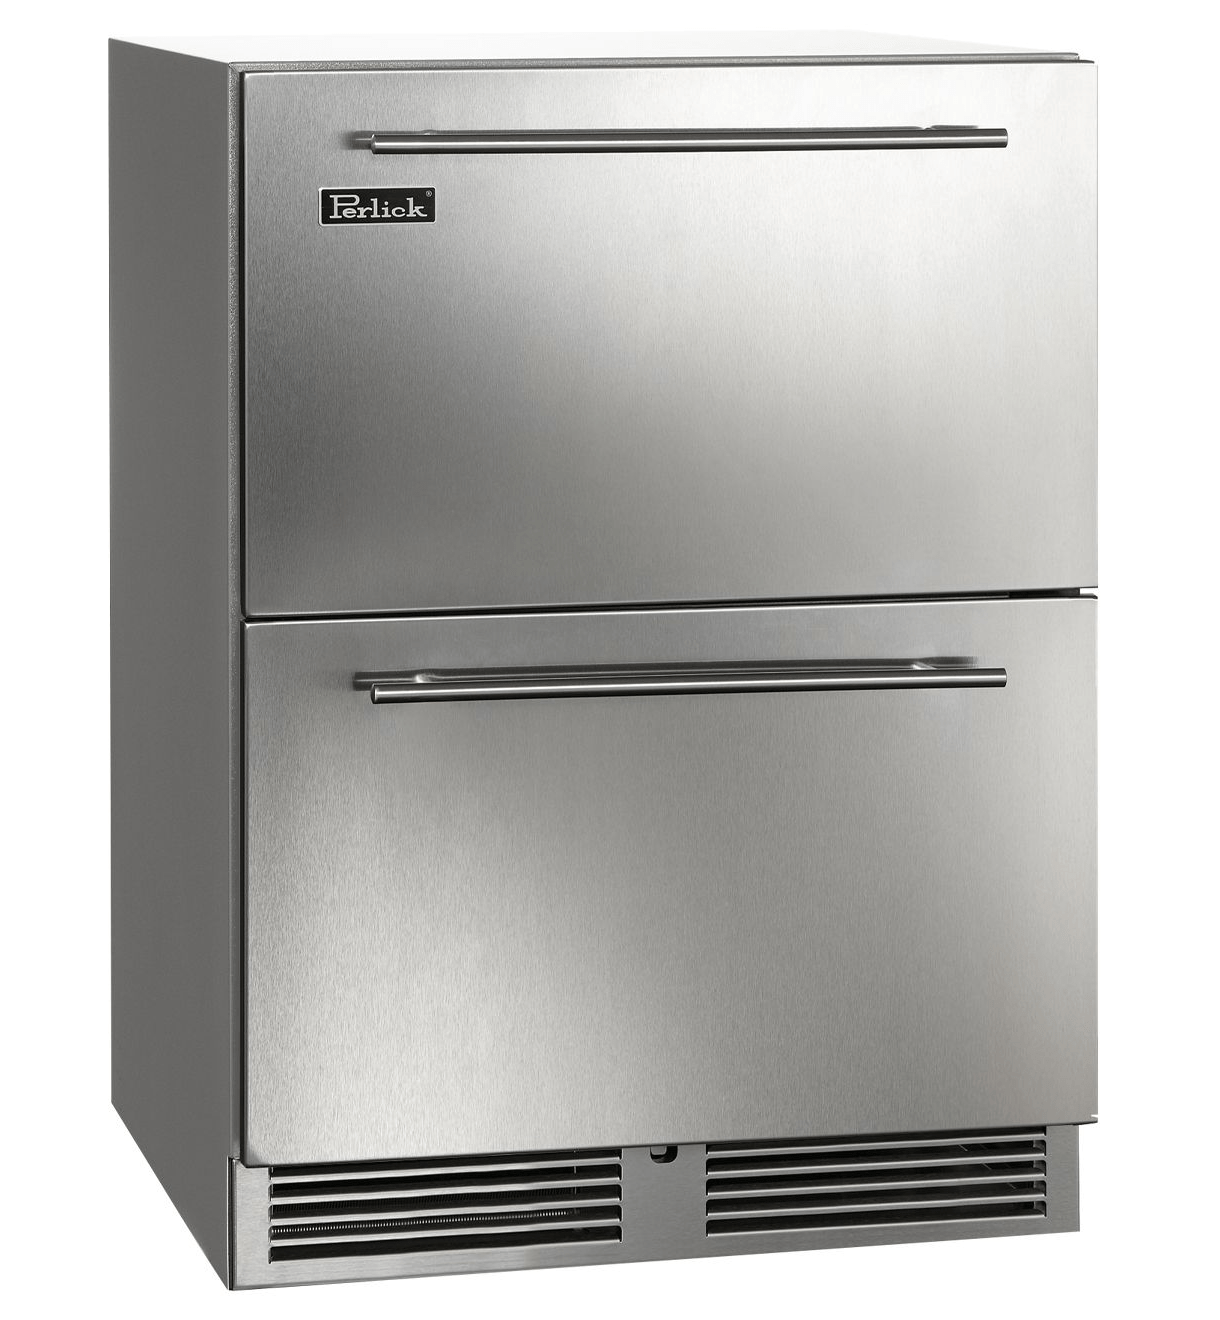 Perlick Refrigeration + Cooling Stainless Steel Drawers Perlick 24" C-Series Built-In Refrigerated Drawers / HC24RO-4 Drawers